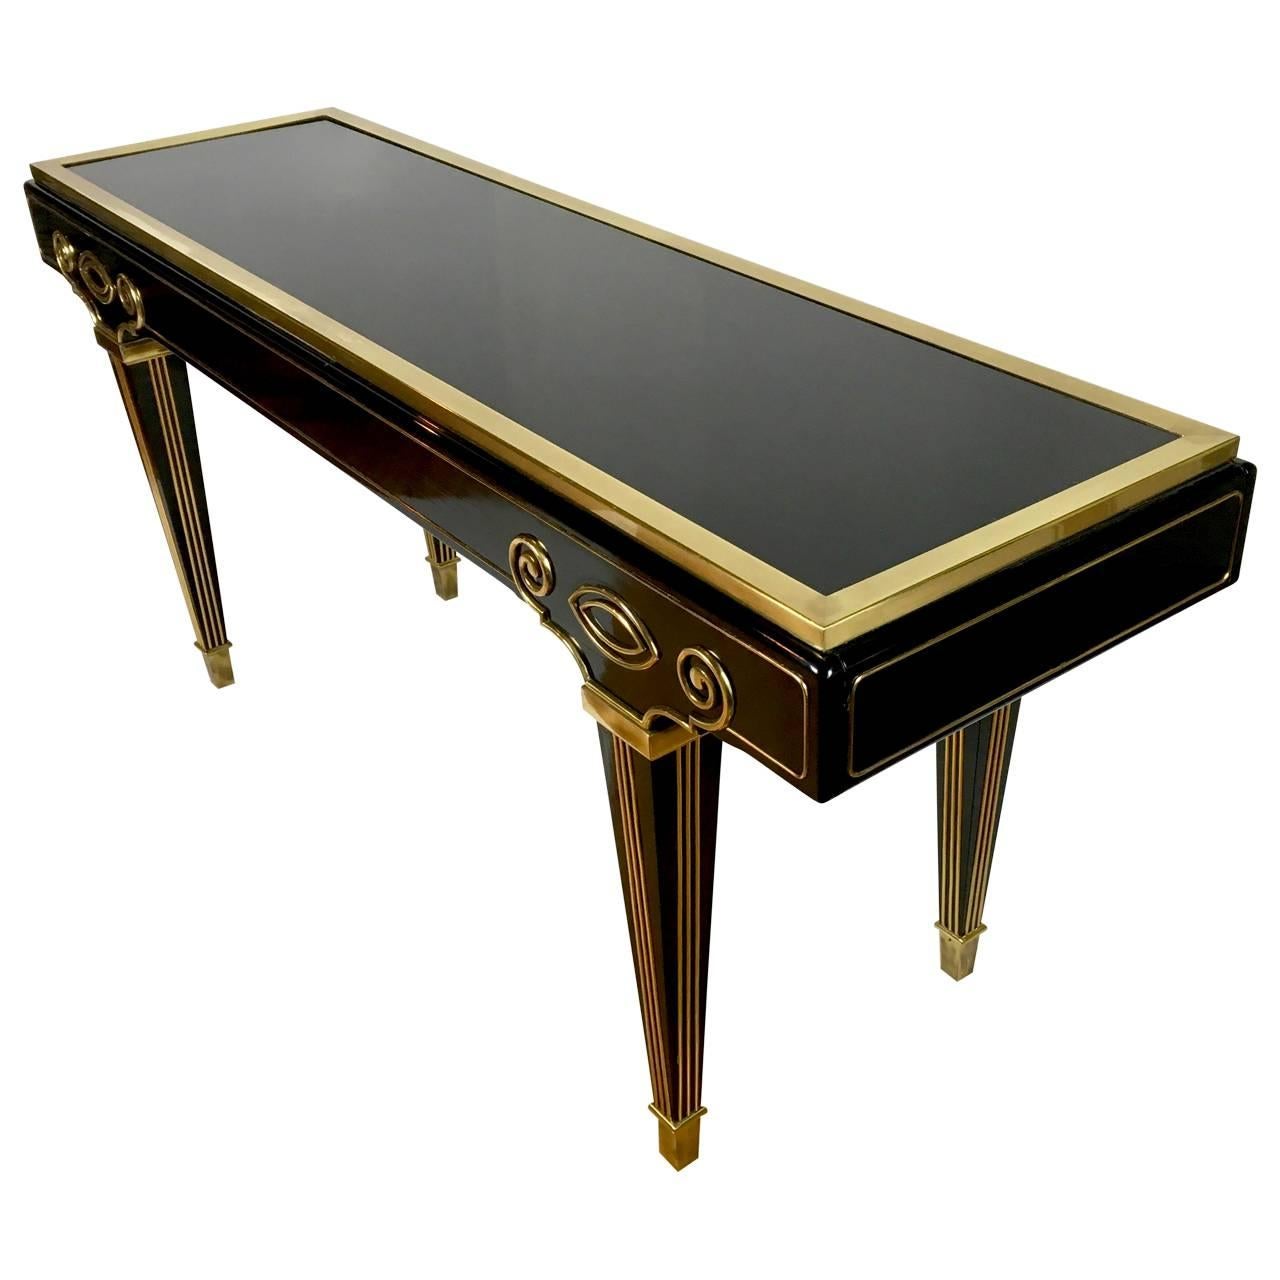 Woodwork Mastercraft Black Lacquer and Brass Modern Empire Console Table